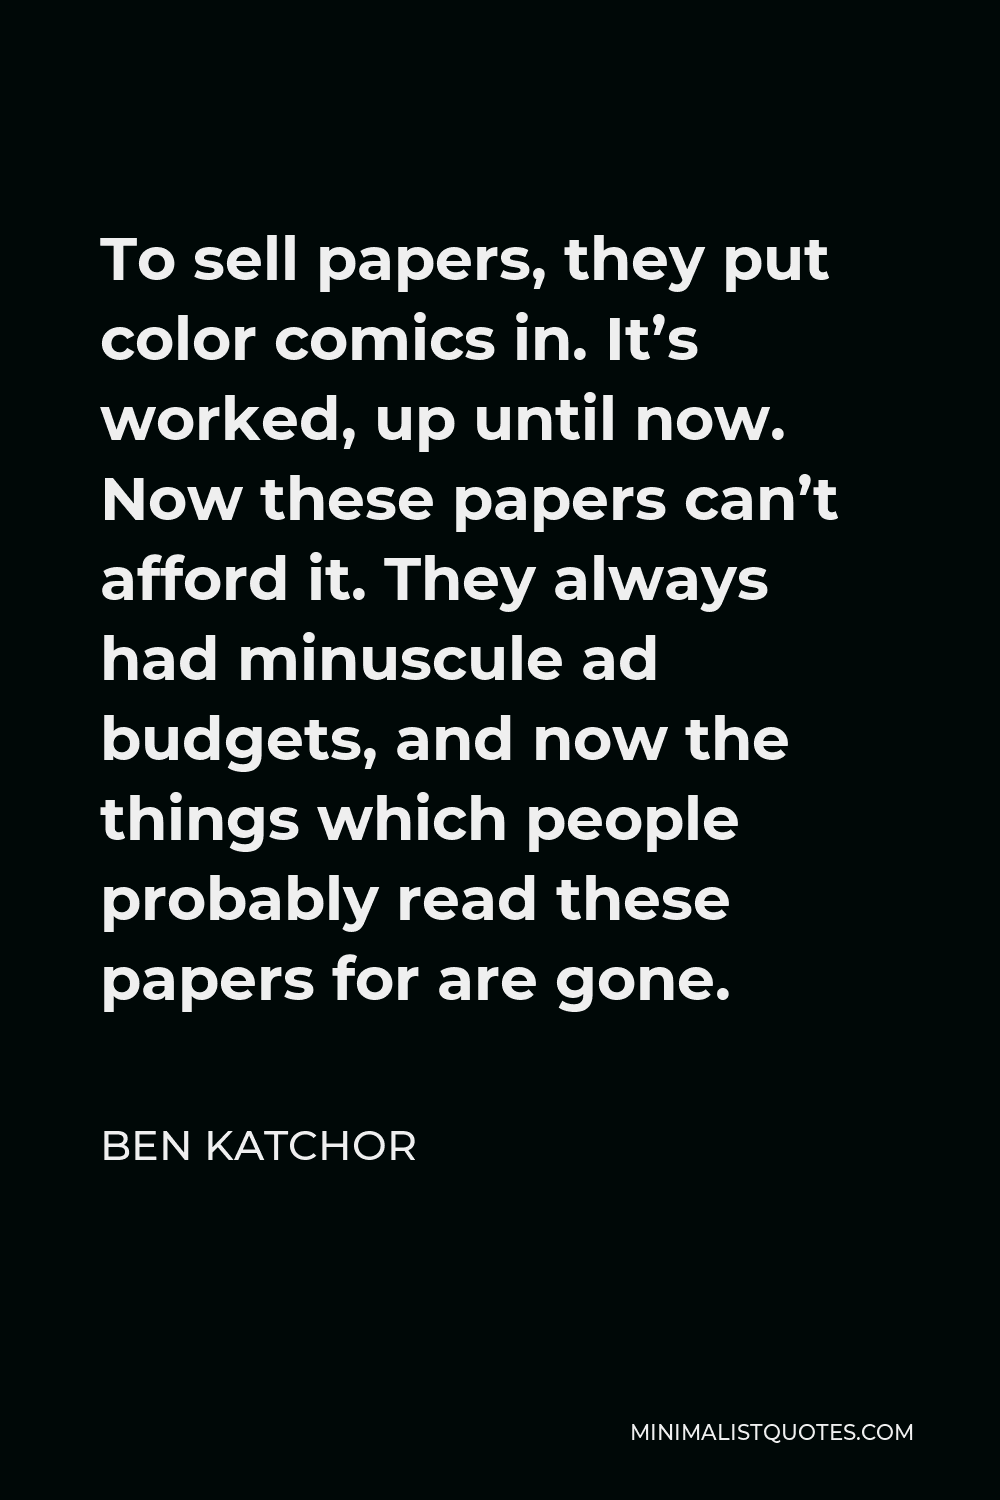 Ben Katchor Quote - To sell papers, they put color comics in. It’s worked, up until now. Now these papers can’t afford it. They always had minuscule ad budgets, and now the things which people probably read these papers for are gone.